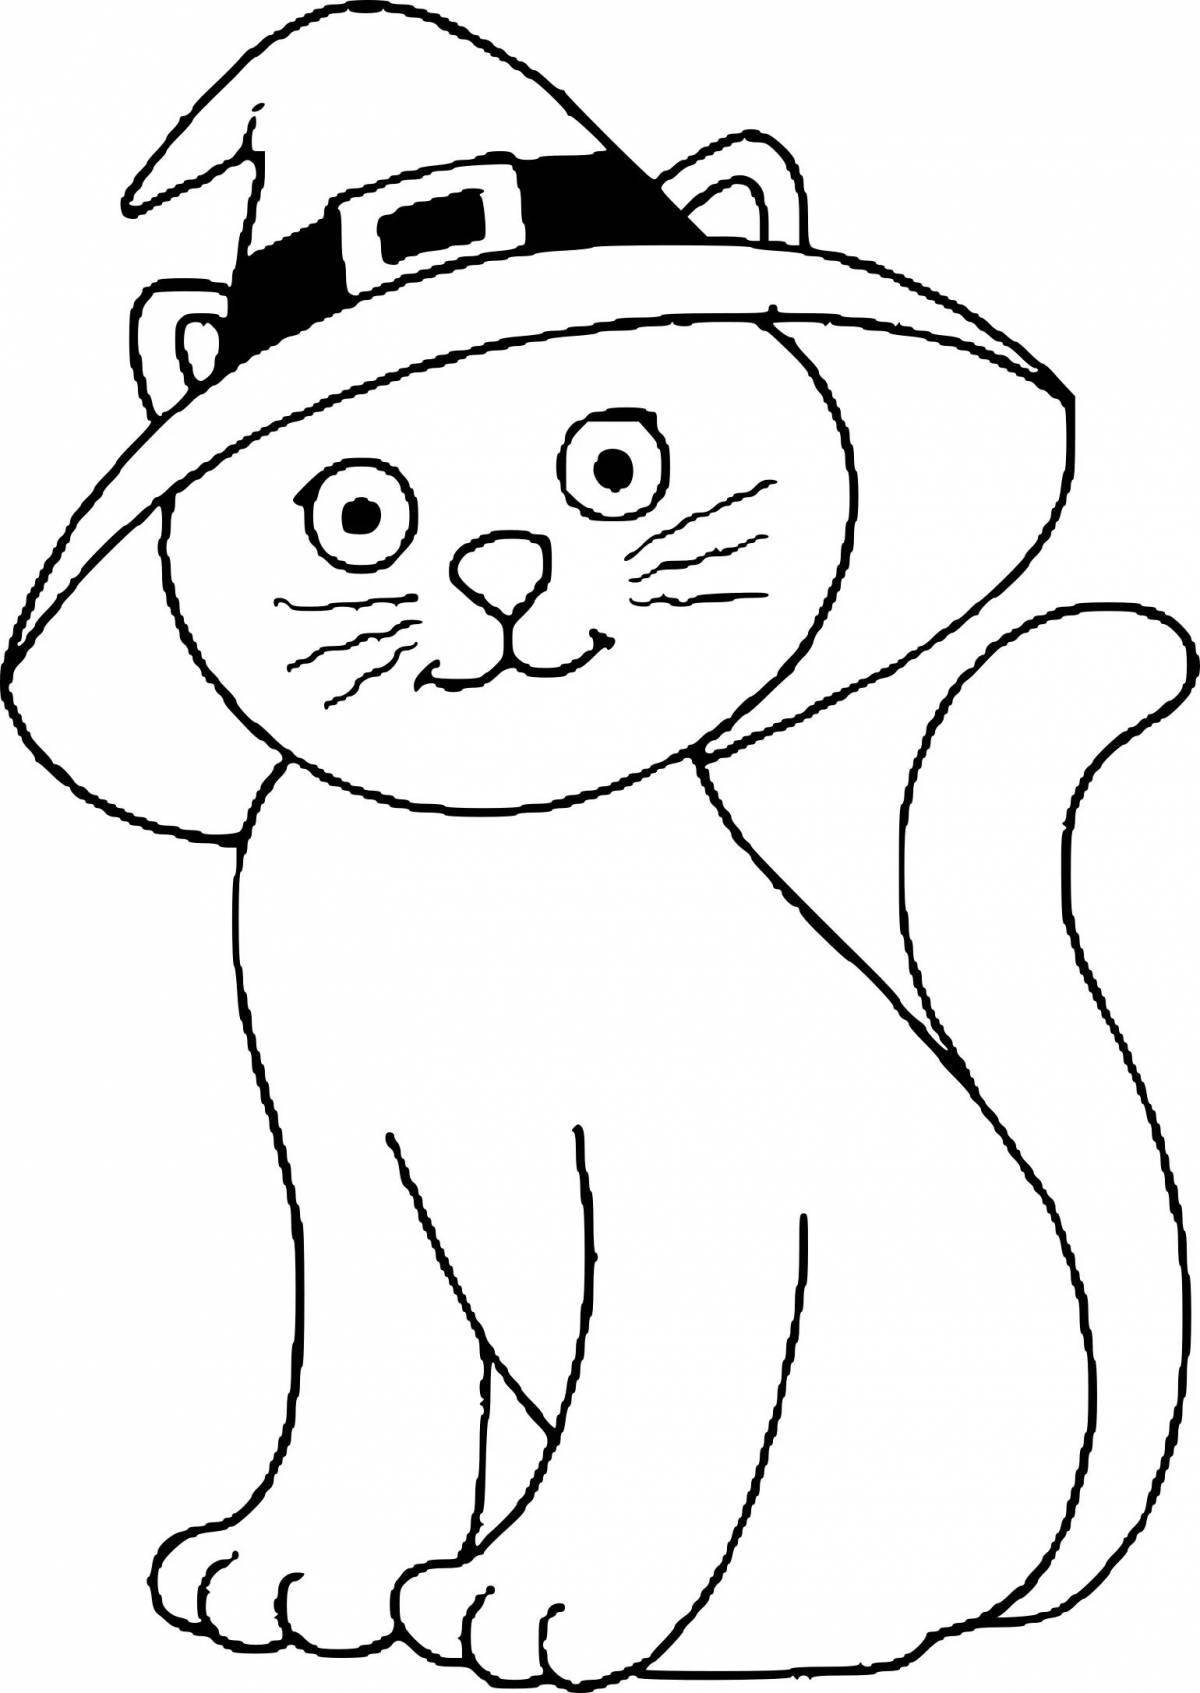 Coloring book humorous cat in a hat